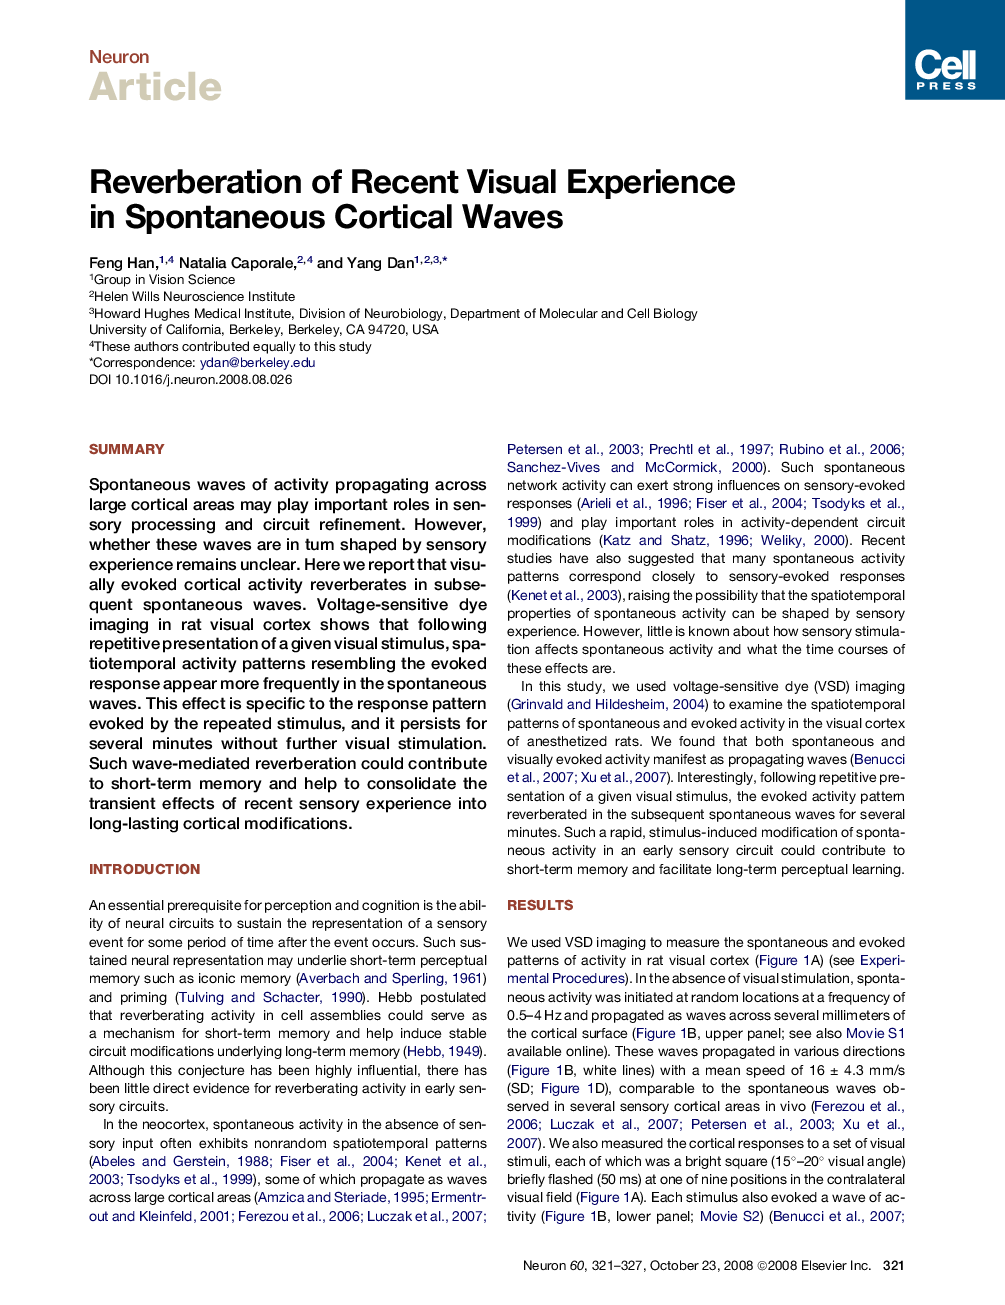 Reverberation of Recent Visual Experience in Spontaneous Cortical Waves